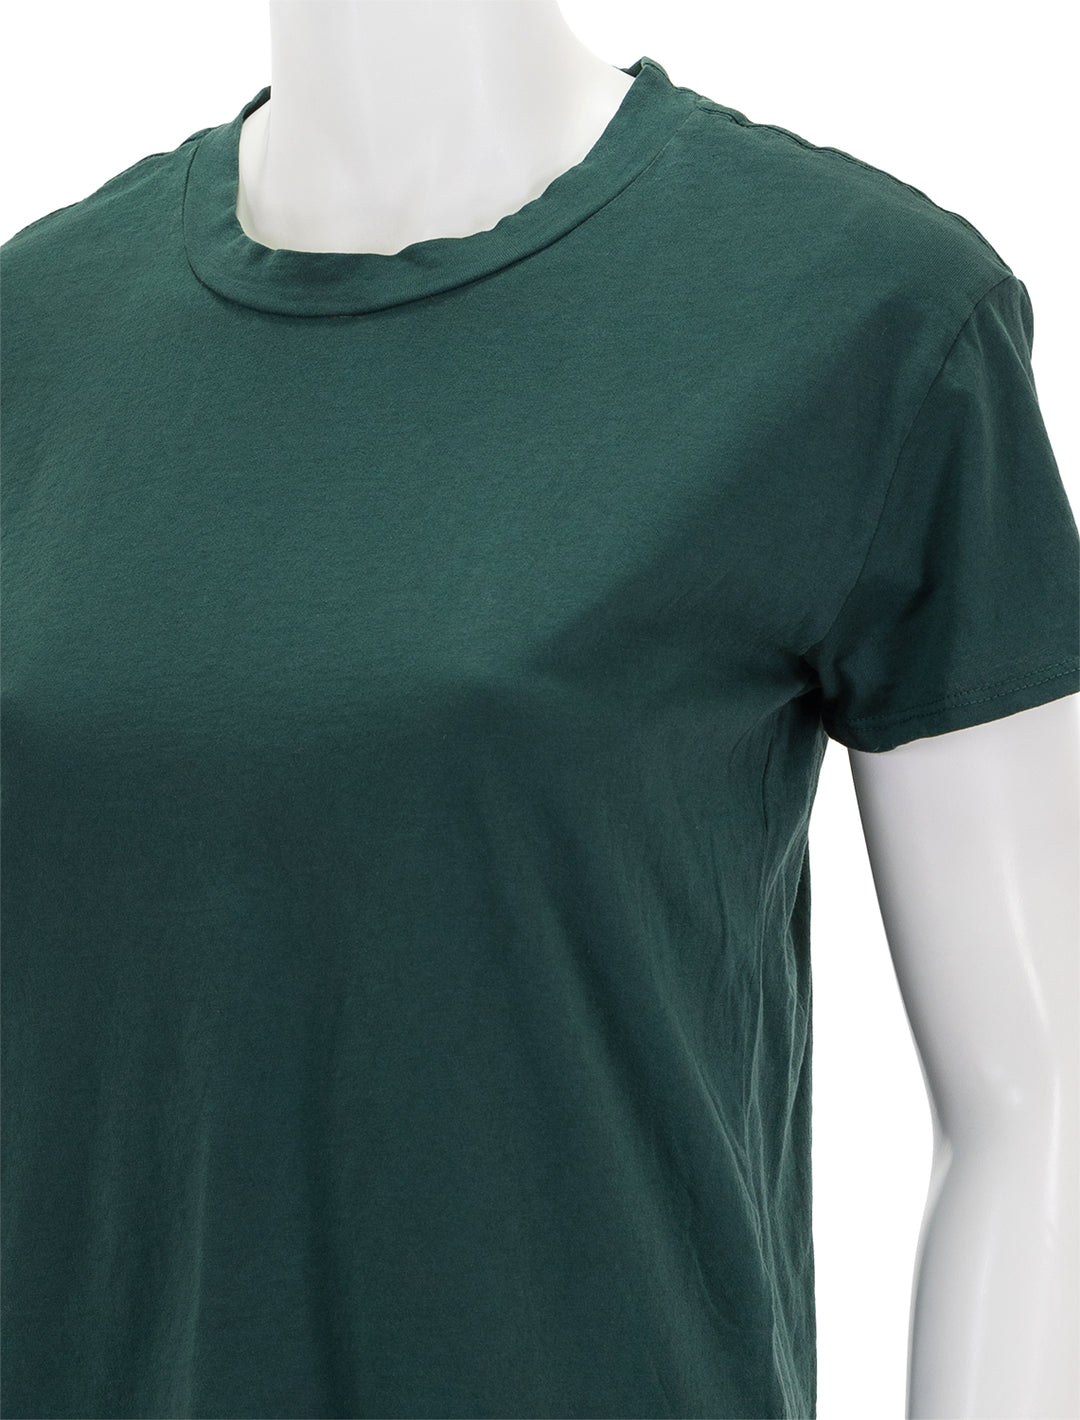 Close-up view of Perfectwhitetee's harley tee in pine.